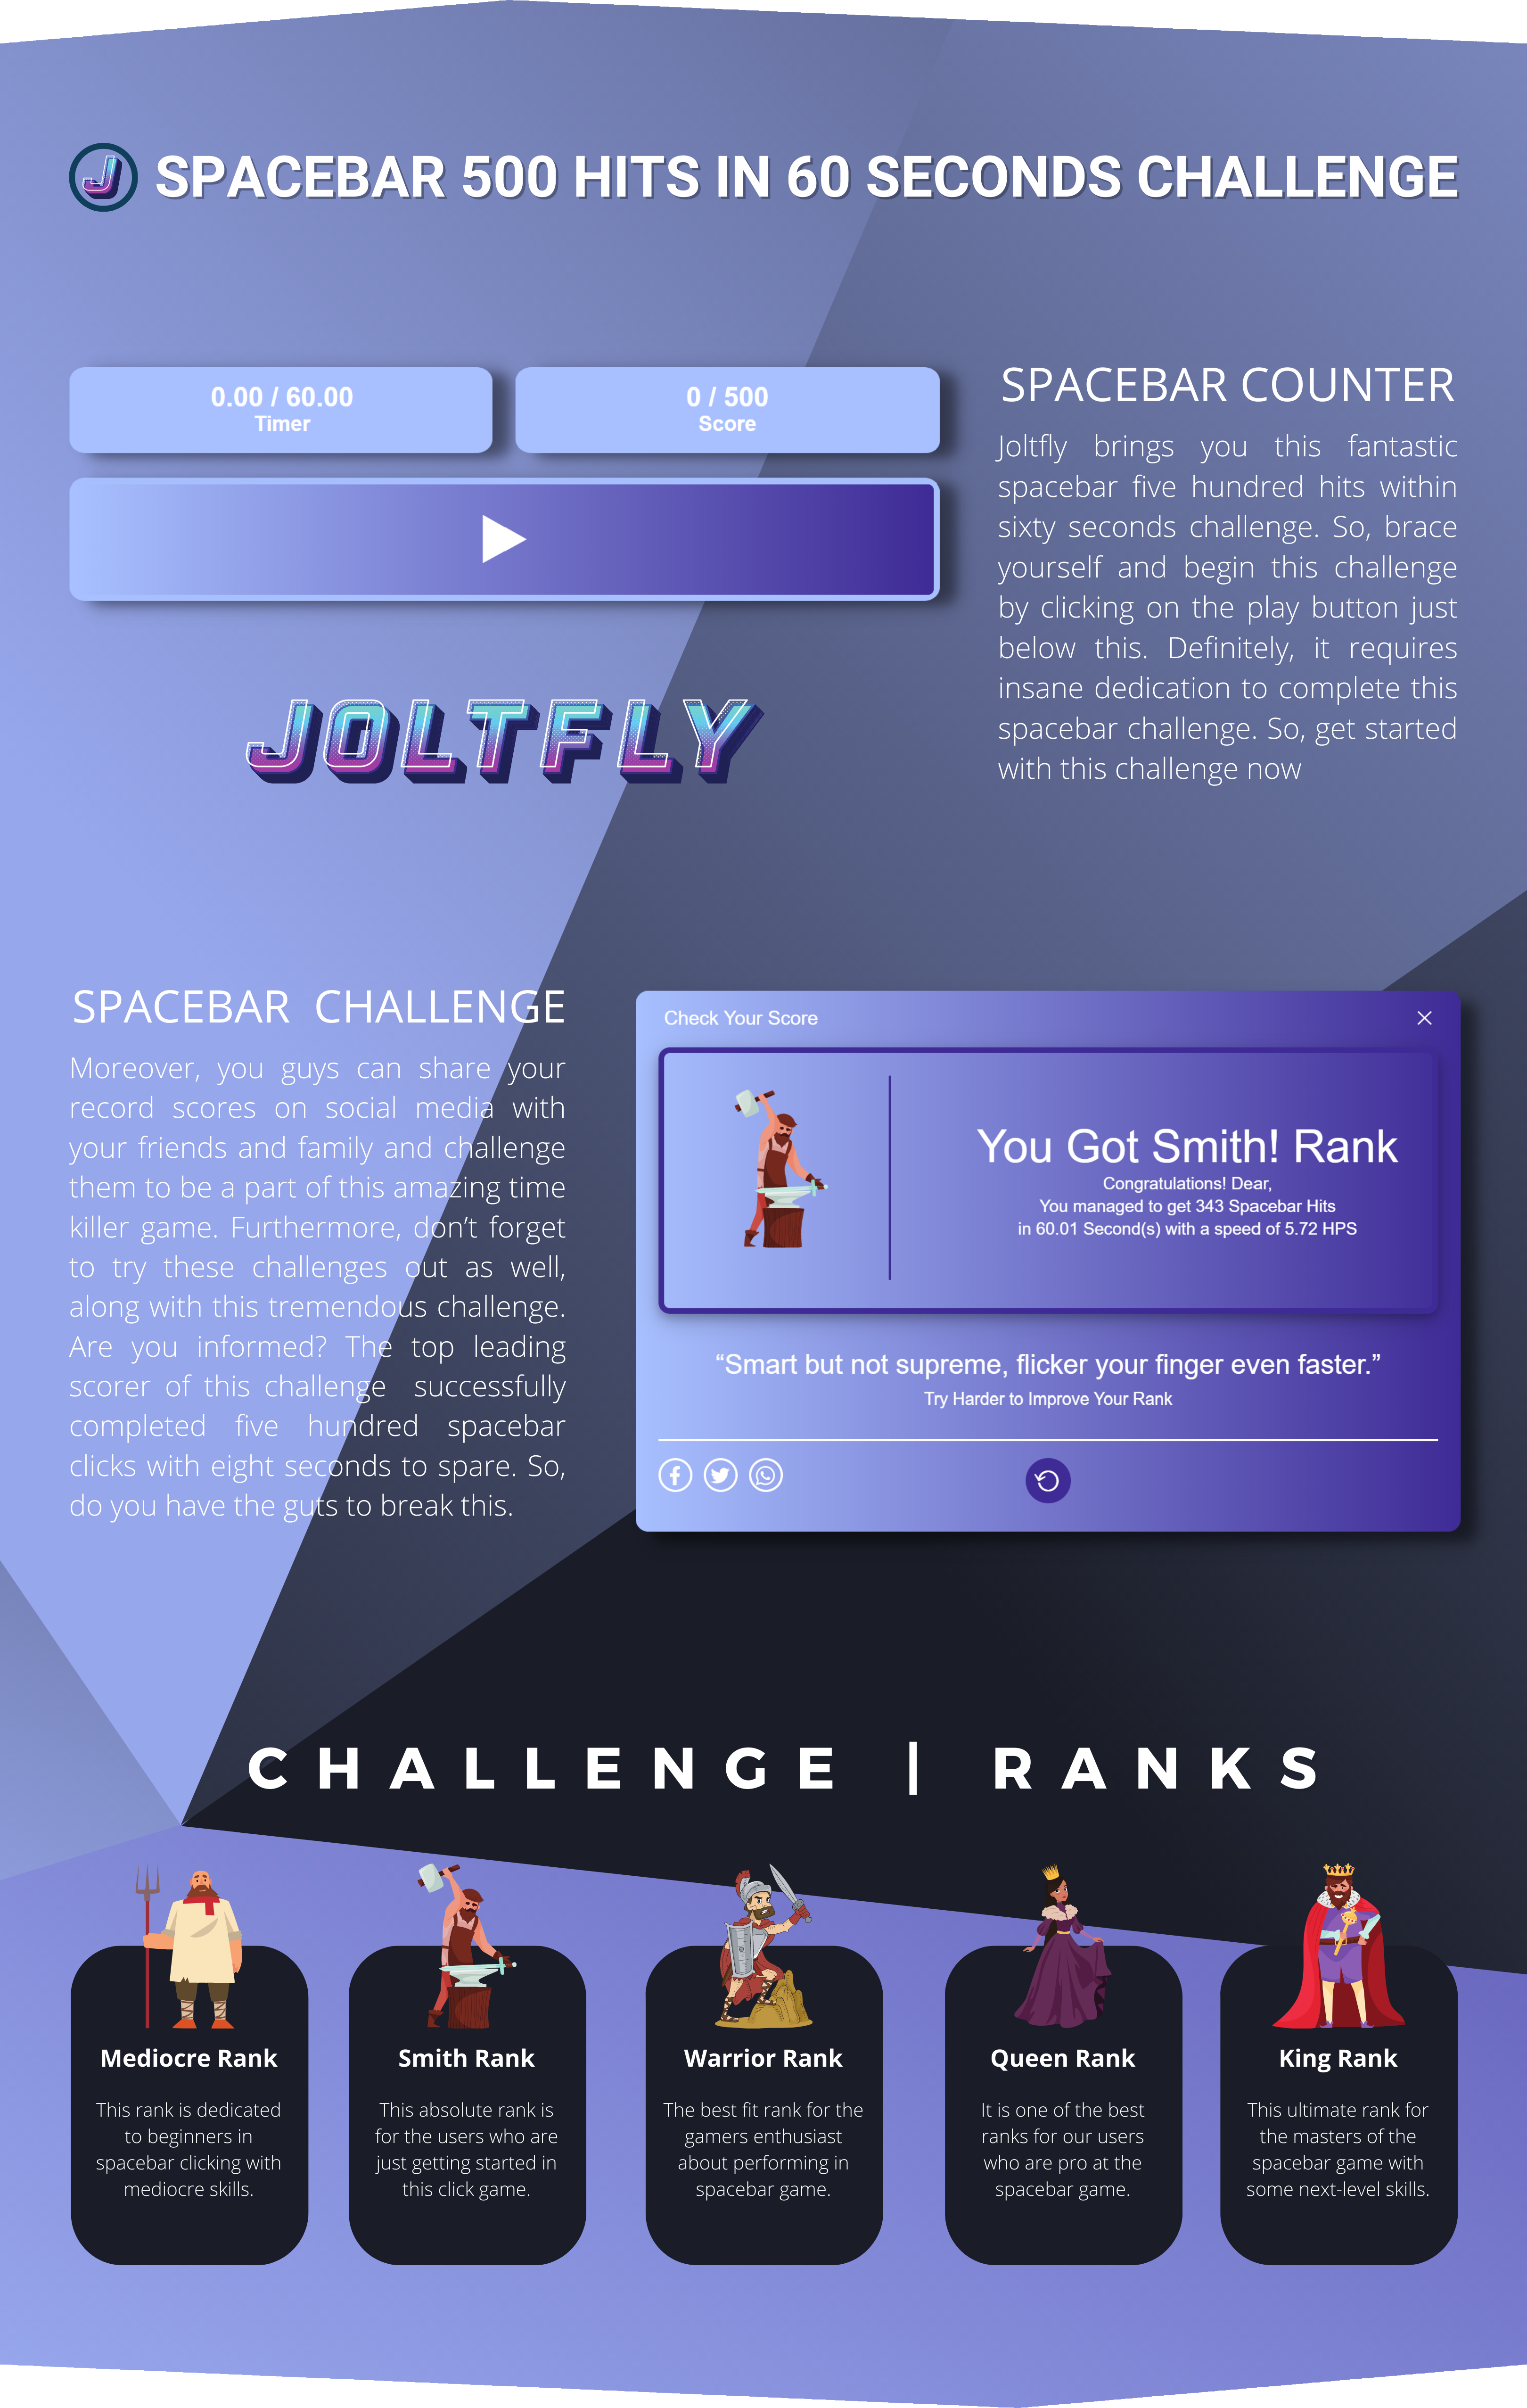 Spacebar 500 Hits in 60 Seconds Challenge - Joltfly